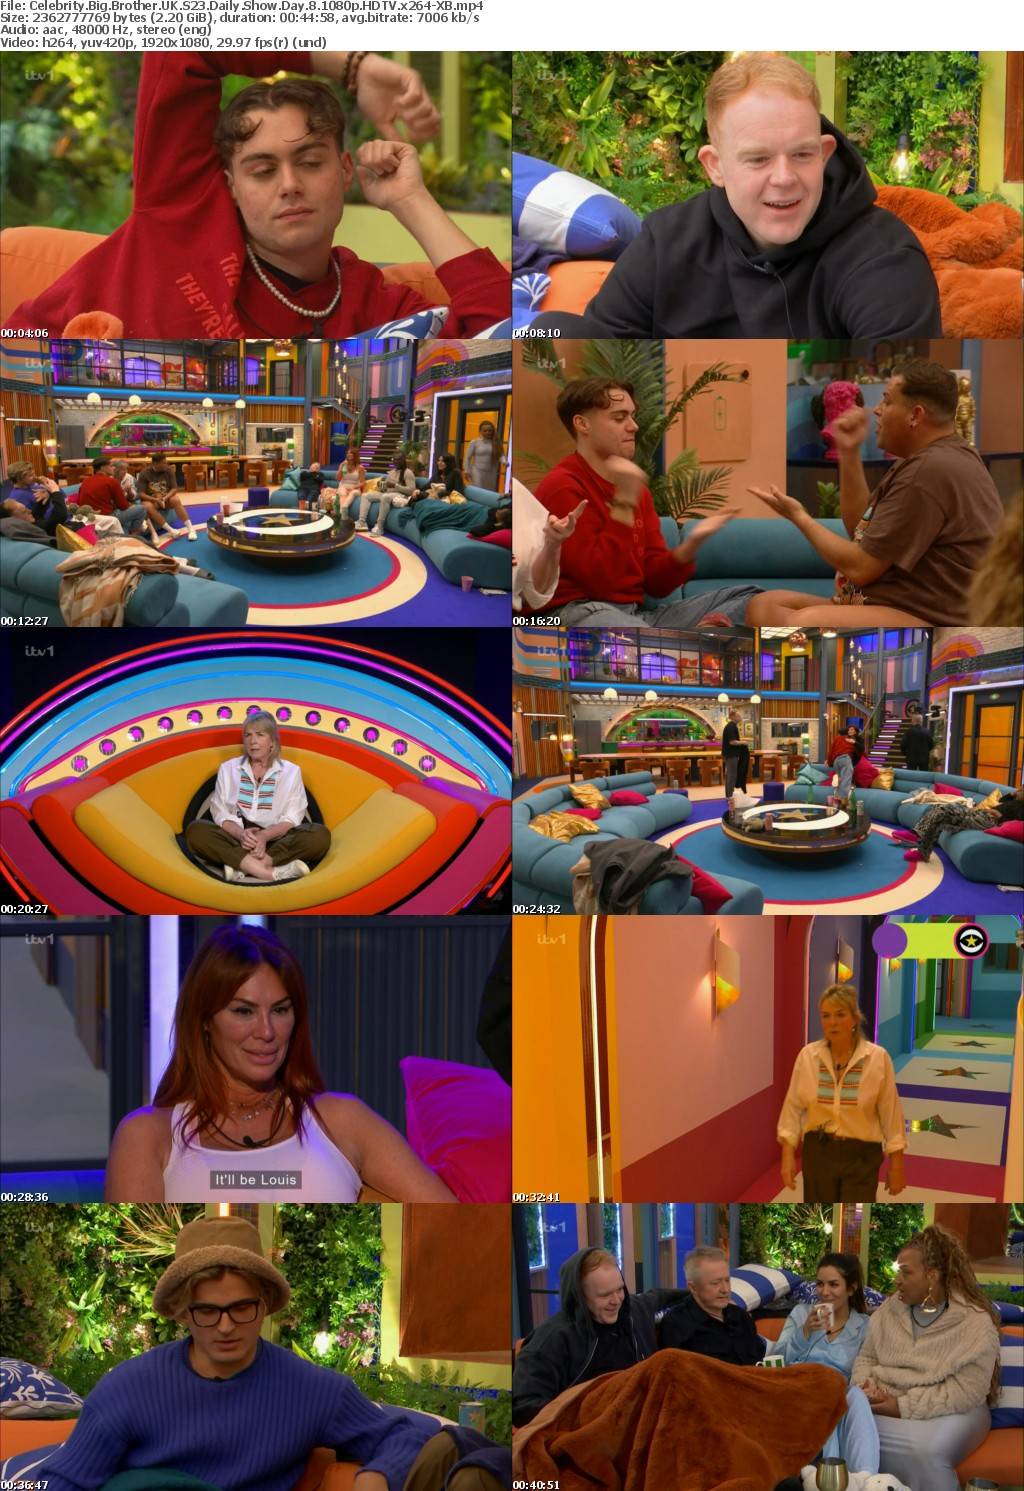 Celebrity Big Brother UK S23 Daily Show Day 8 1080p HDTV x264-XB